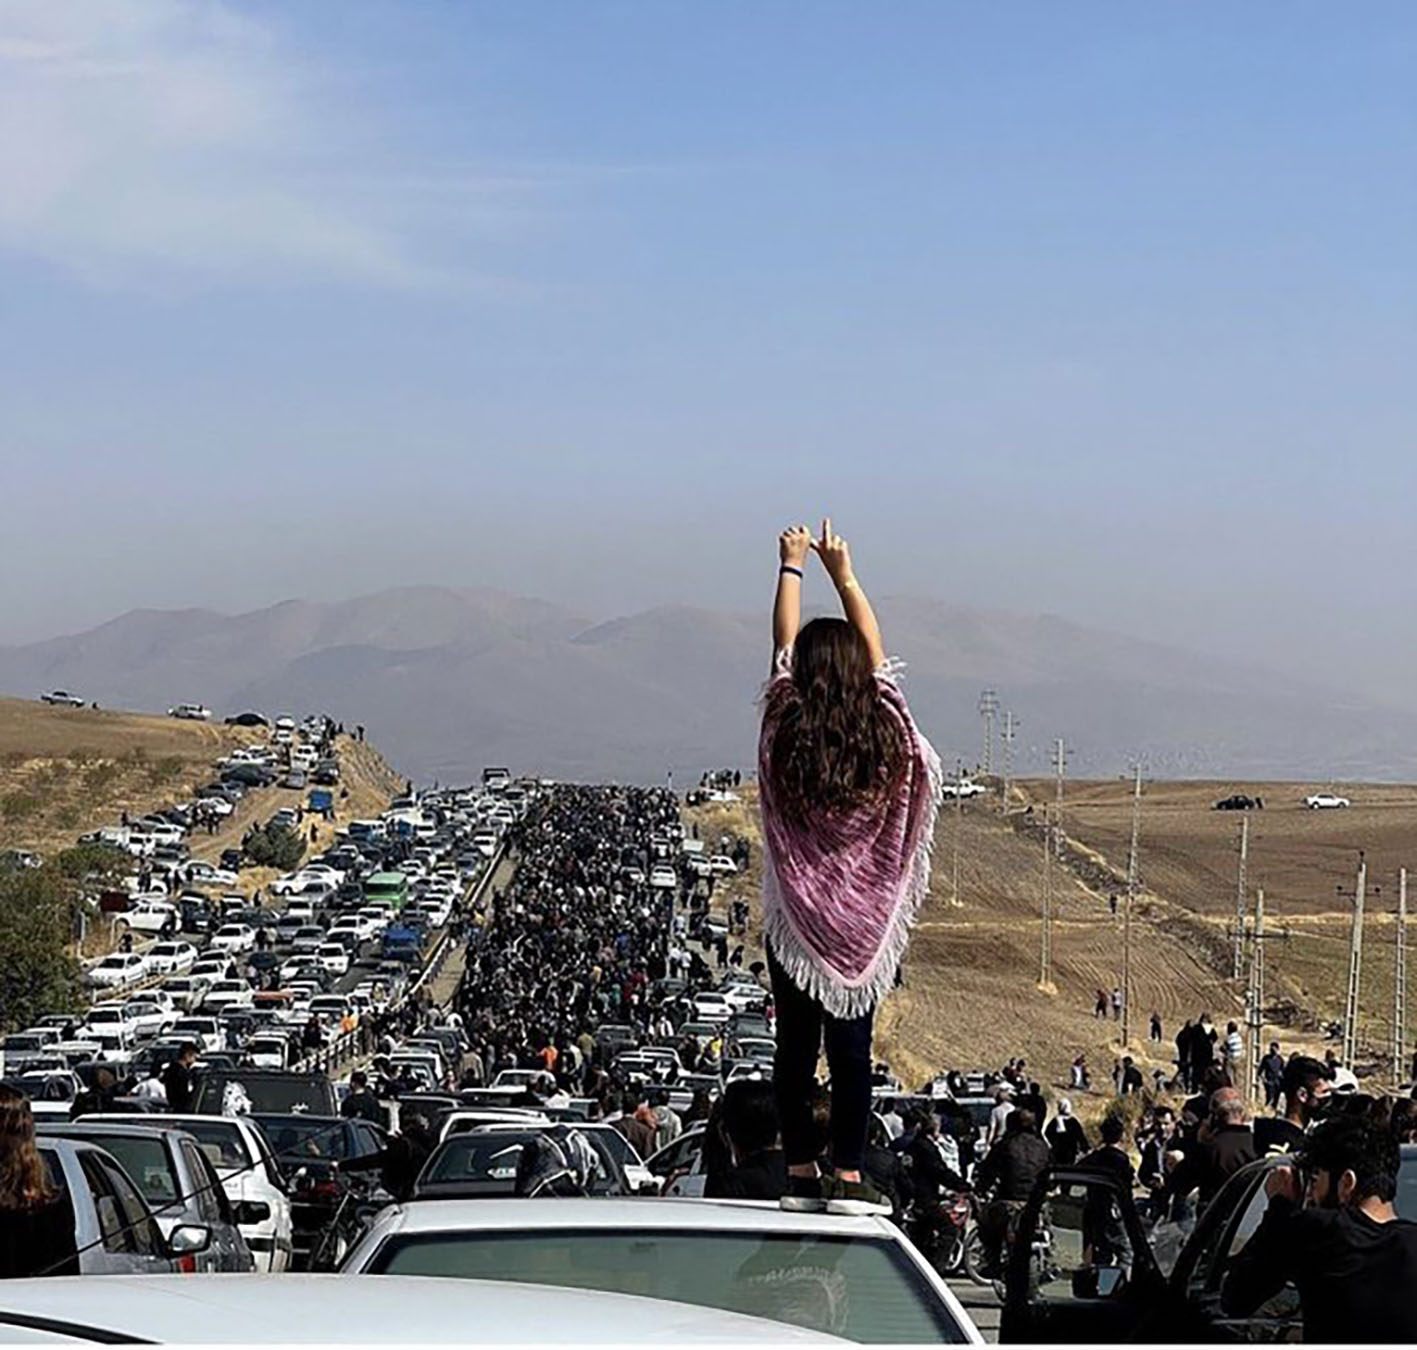 A young woman without a hijab stands on a vehicle as thousands of people make their way to the Aychi cemetery, to commemorate the 40th day of Mahsa Amini’s death, in Saqqez, her hometown in Iranian Kurdistan. Muslim tradition celebrates this date as the day of the soul’s passage to the afterlife, and the end of mourning. Saqqez, Iranian Kurdistan, October 26, 2022. Anonymous photographer.